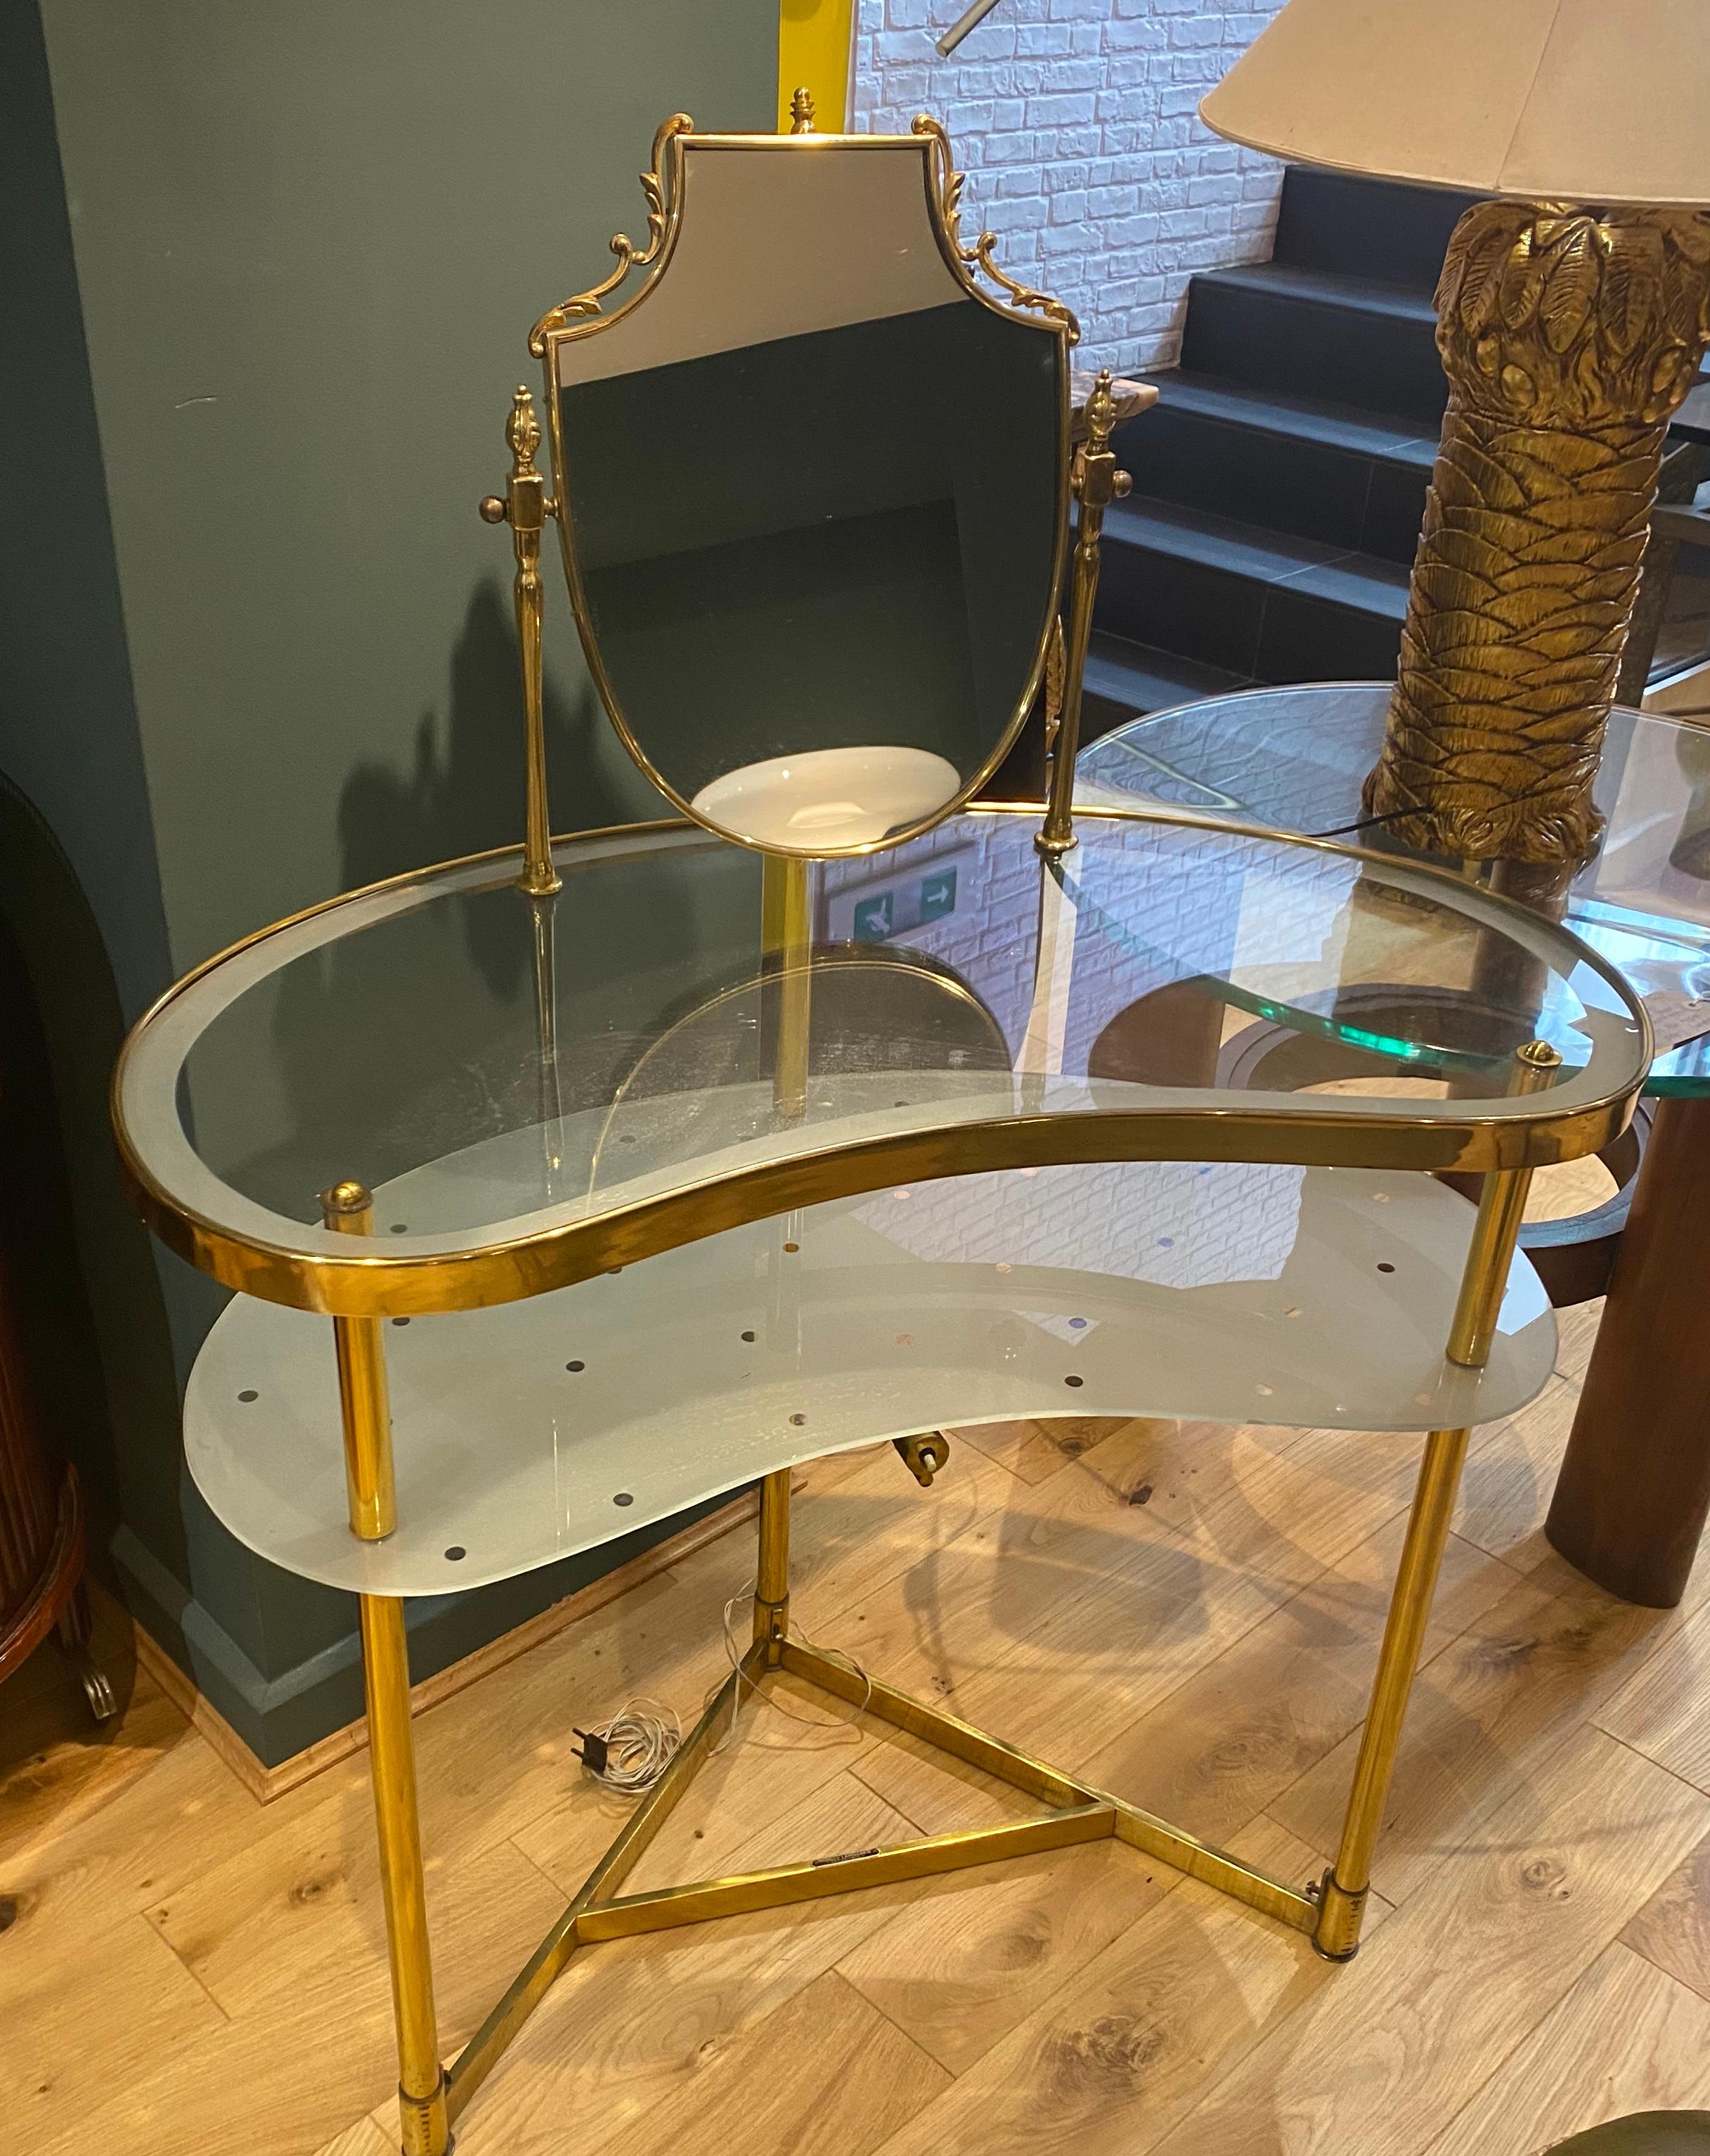 A fabulous 2 tiered 1950s glass and brass vanity table with adjustable mirror in a decorative frame. The lower shelf is etched with polka dots and illuminated by a light underneath.
Stamped MODELLO LAMPADARTE - DEPOSITATO -